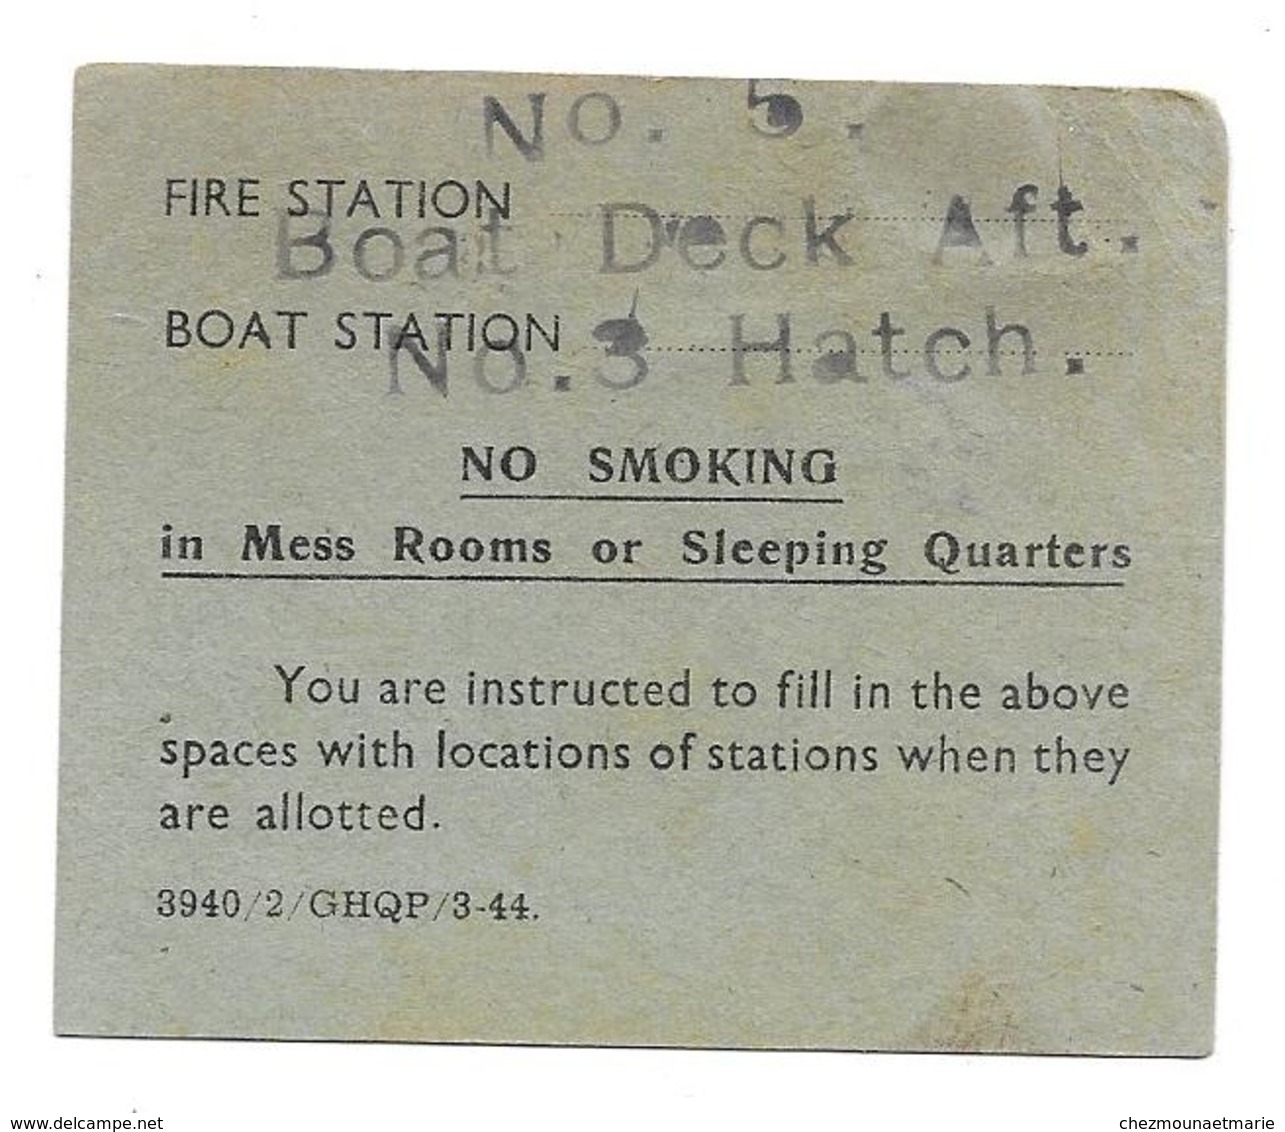 BERTHING CARD - N°5 BOAT DECK AFT N°3 HATCH - FIRE STATION BOAT SATATION - MILITAIRE - Barcos